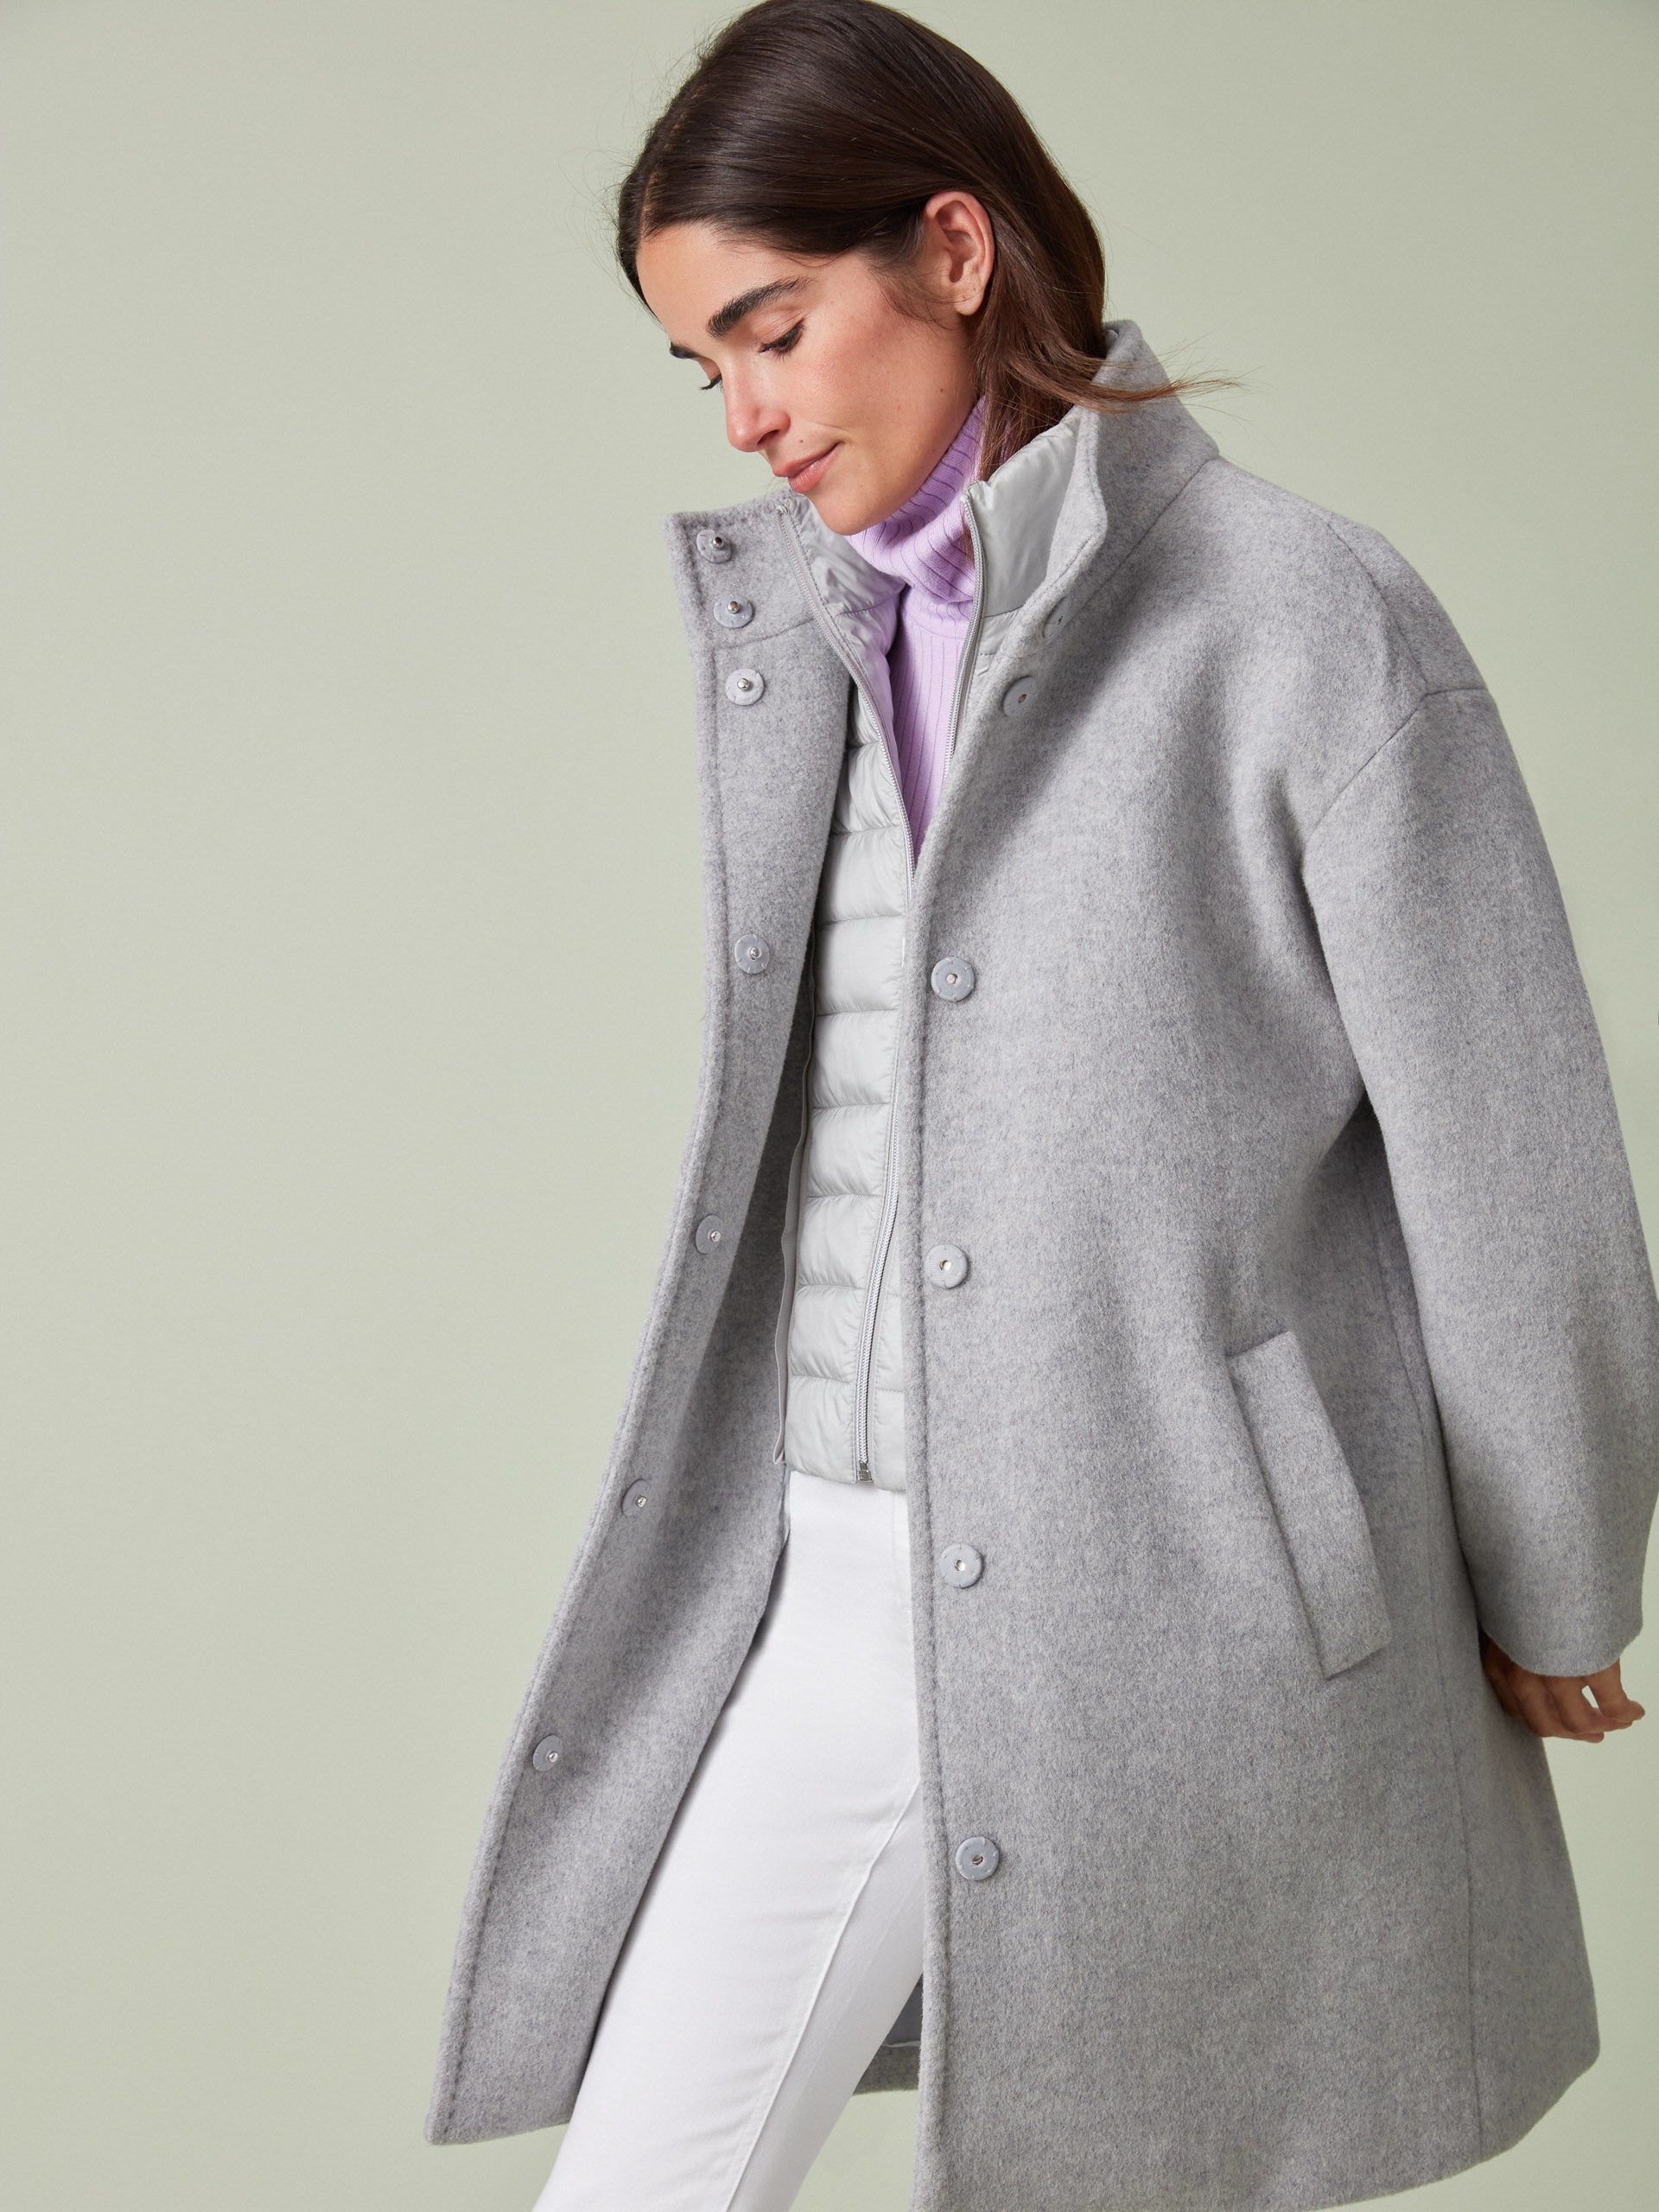 Model wearing J.McLaughlin Stoll coat in heather gray made with wool.